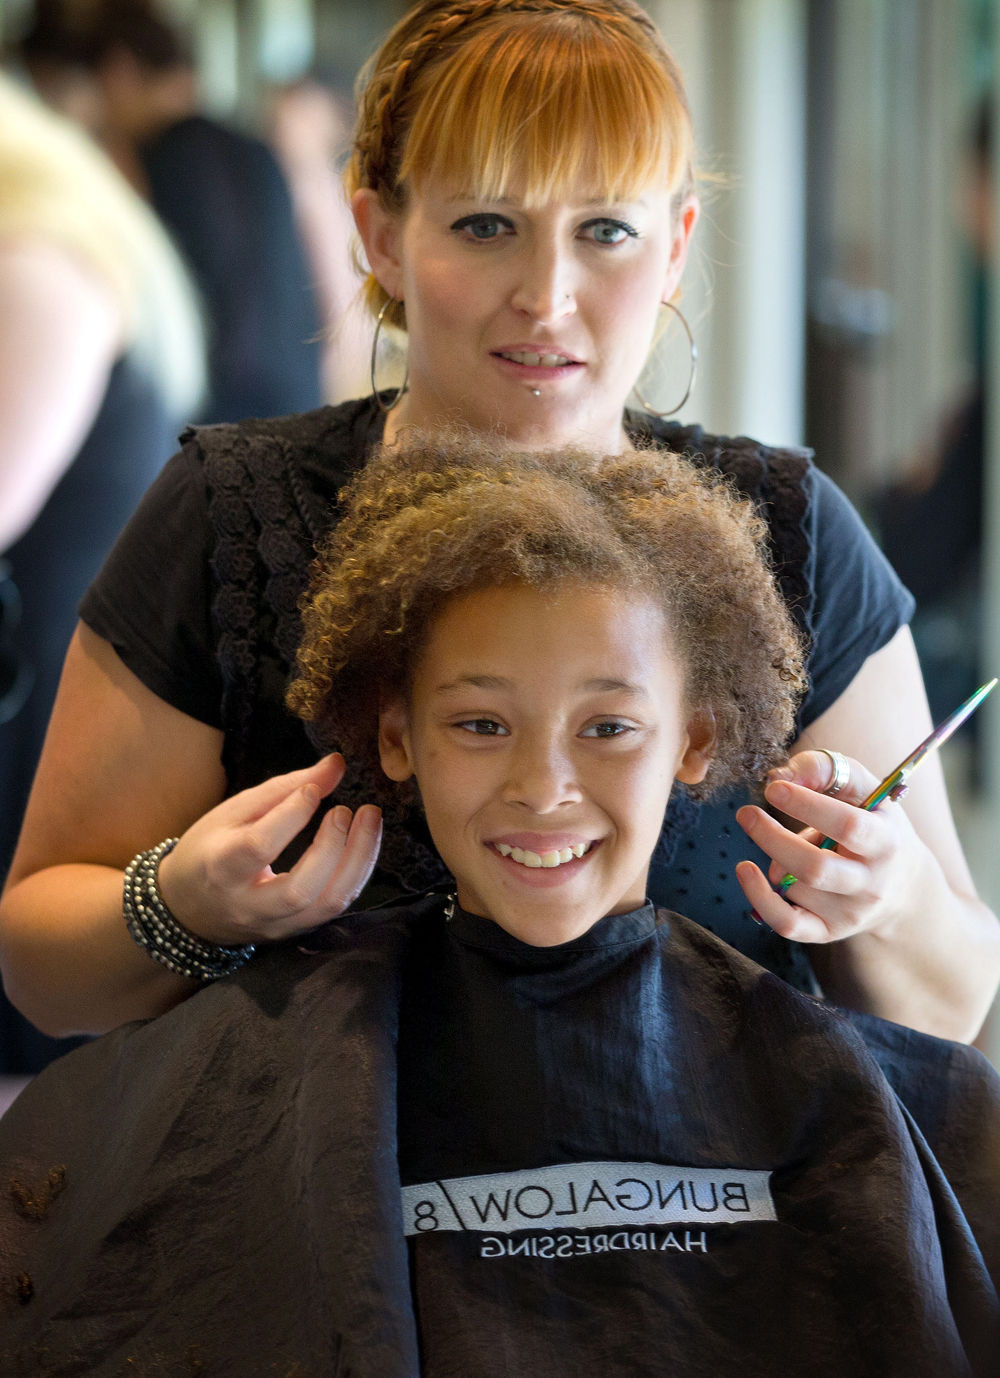 Kids Haircuts Omaha
 Charity event gives kids cool new hairdos for school year